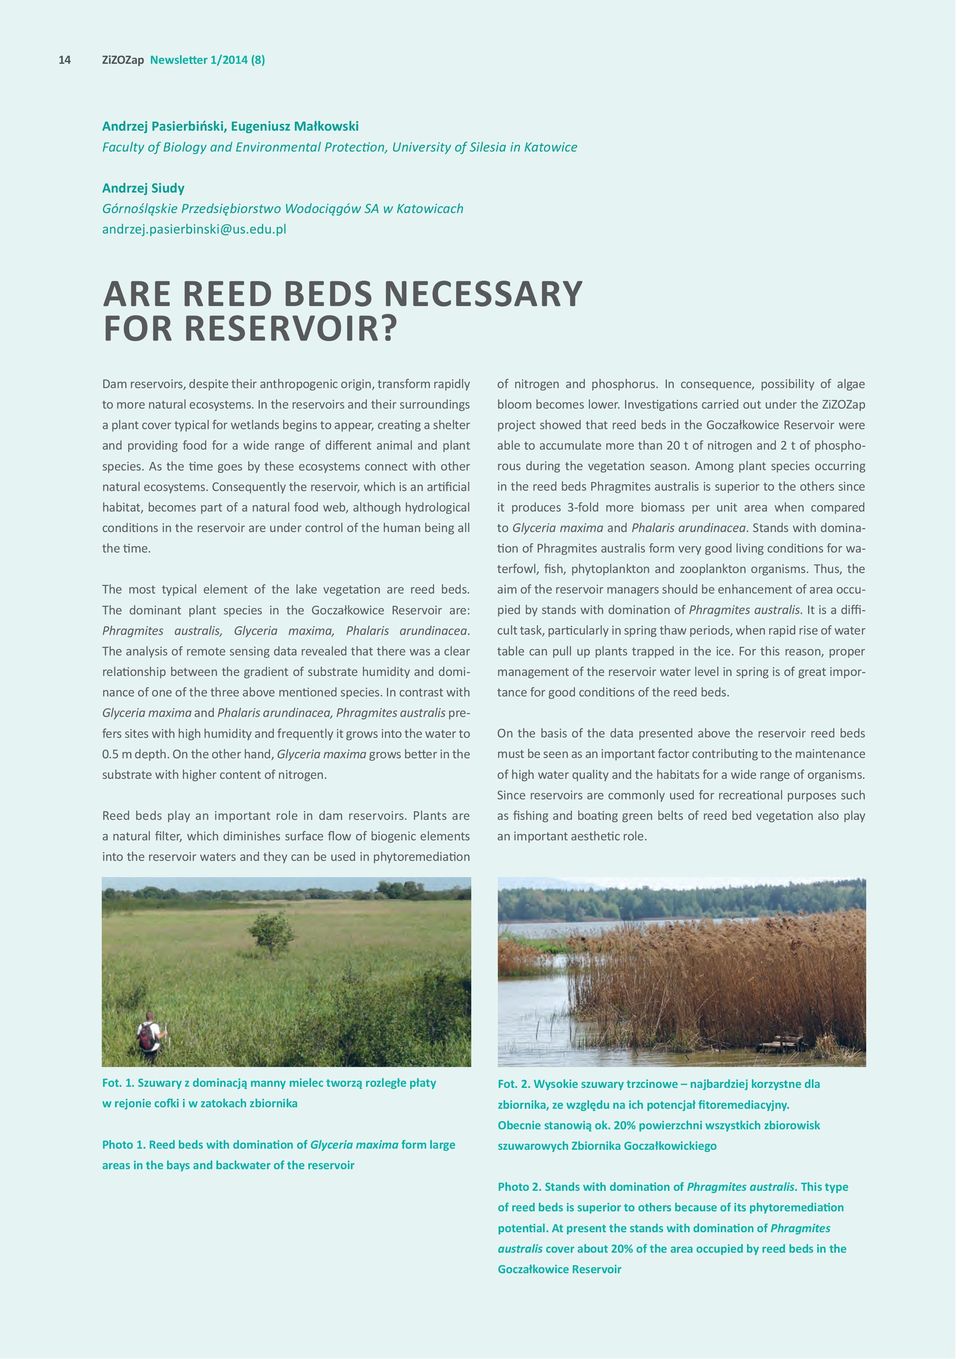 In the reservoirs and their surroundings a plant cover typical for wetlands begins to appear, creating a shelter and providing food for a wide range of different animal and plant species.